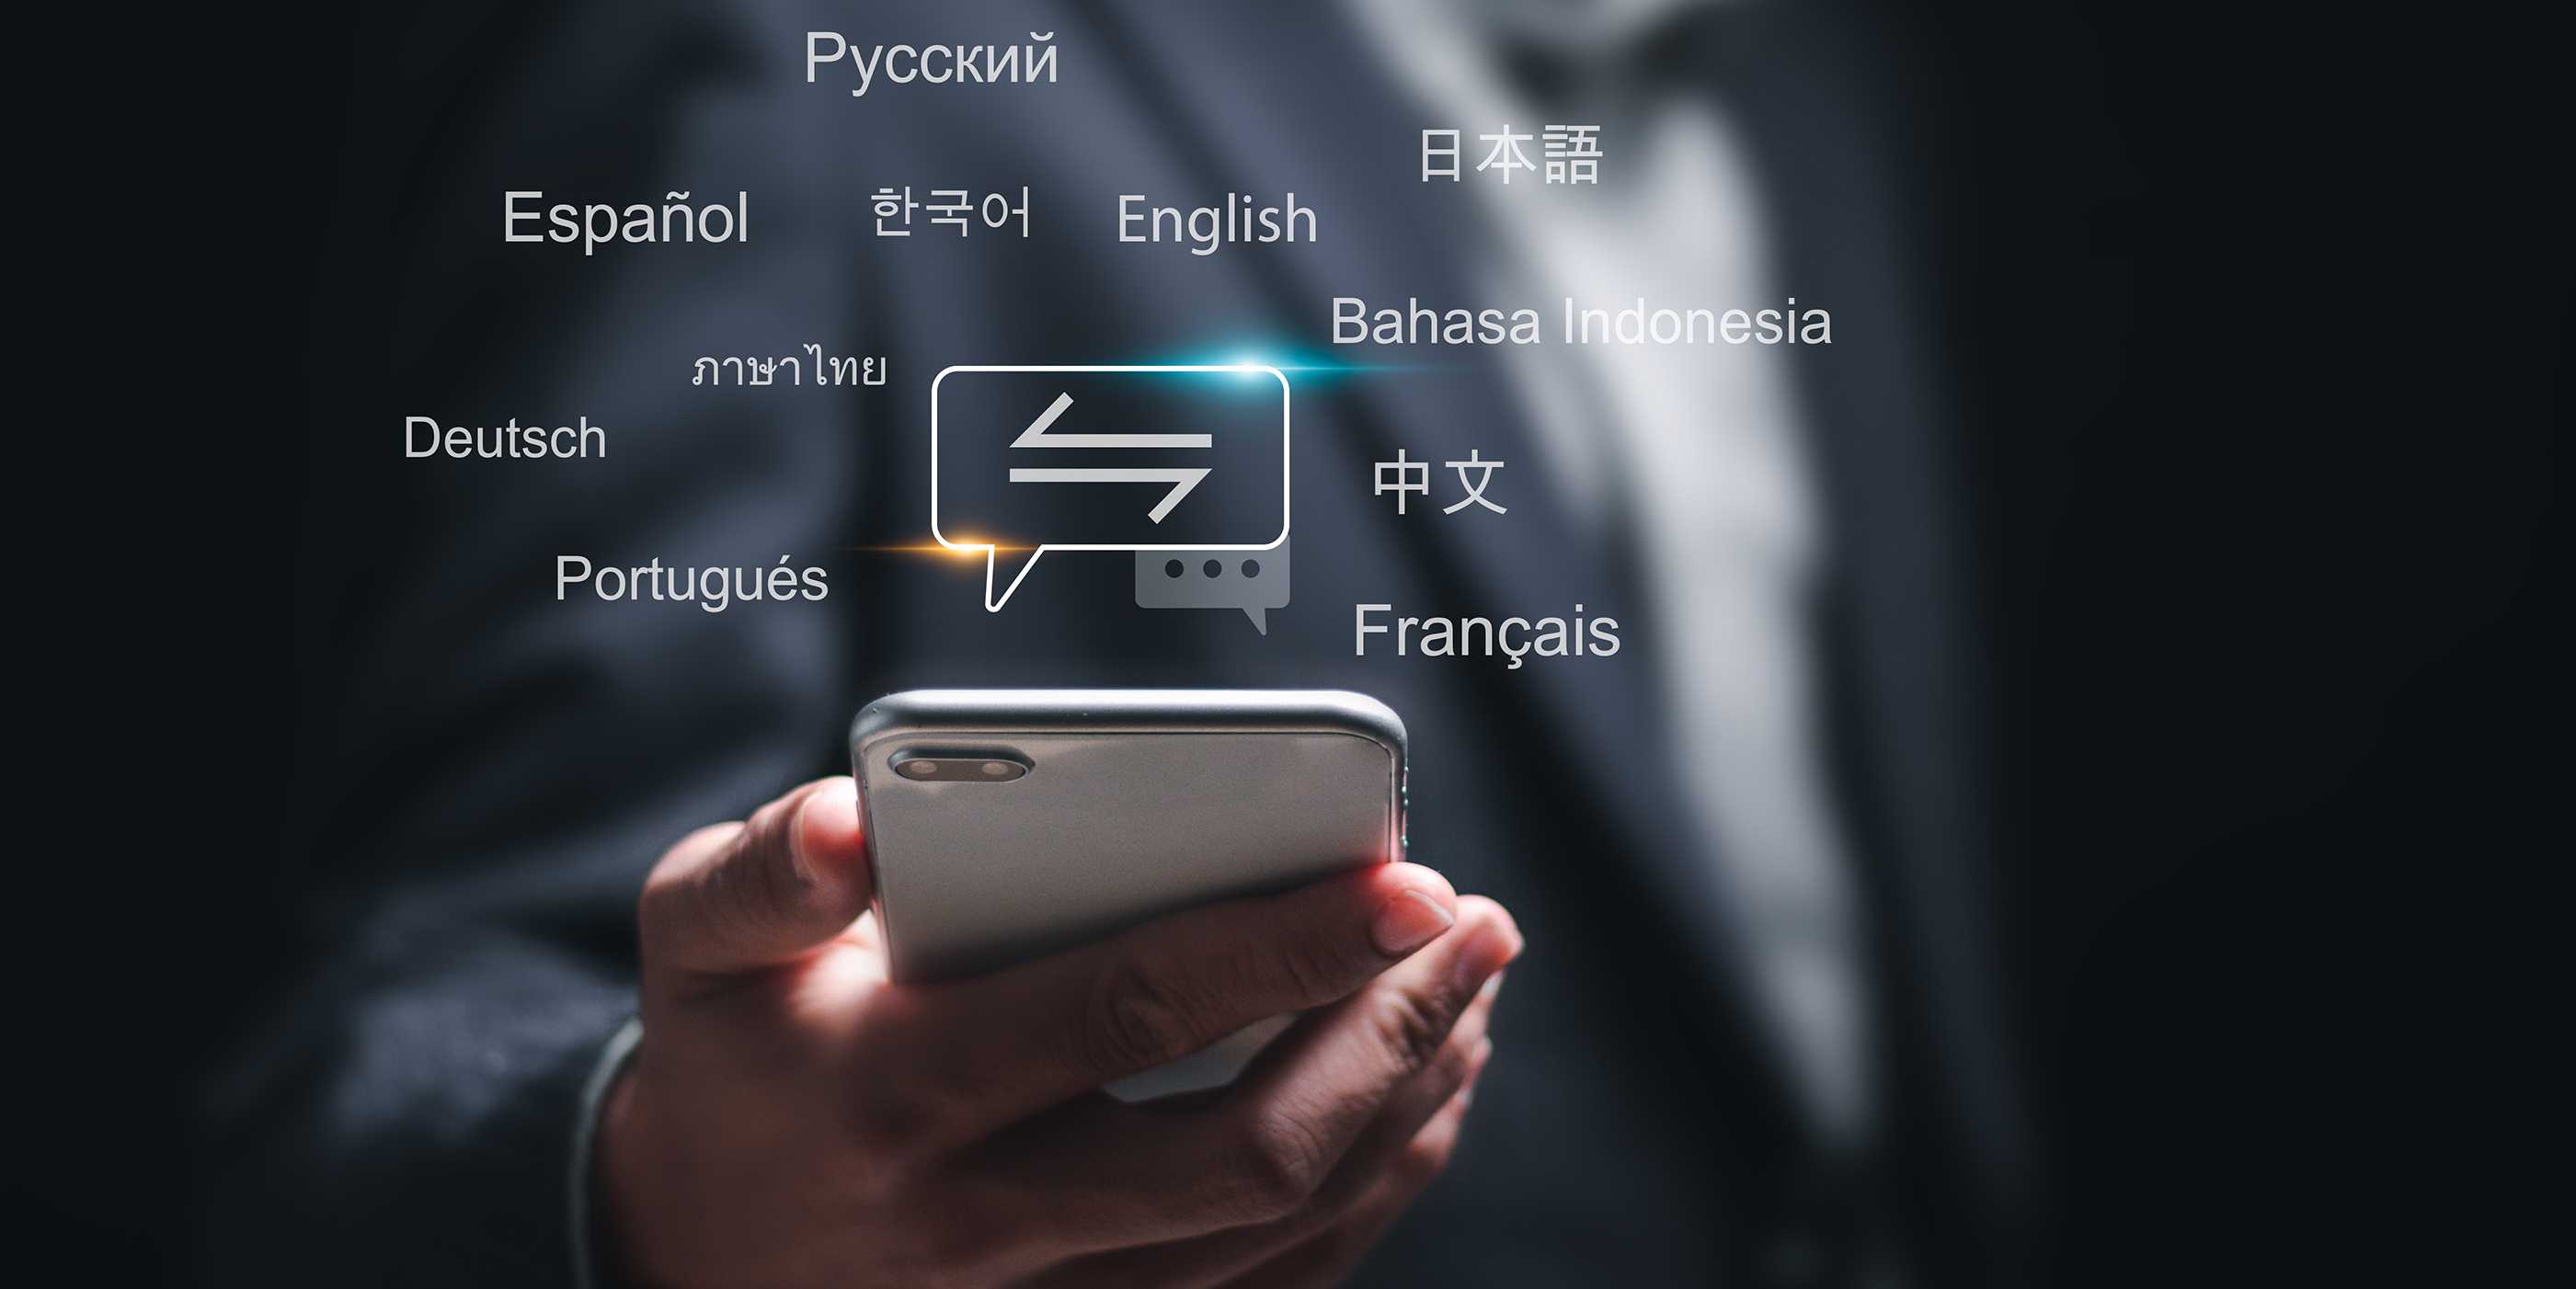 Hand holding a smartphone, words in different languages appear in the air above it